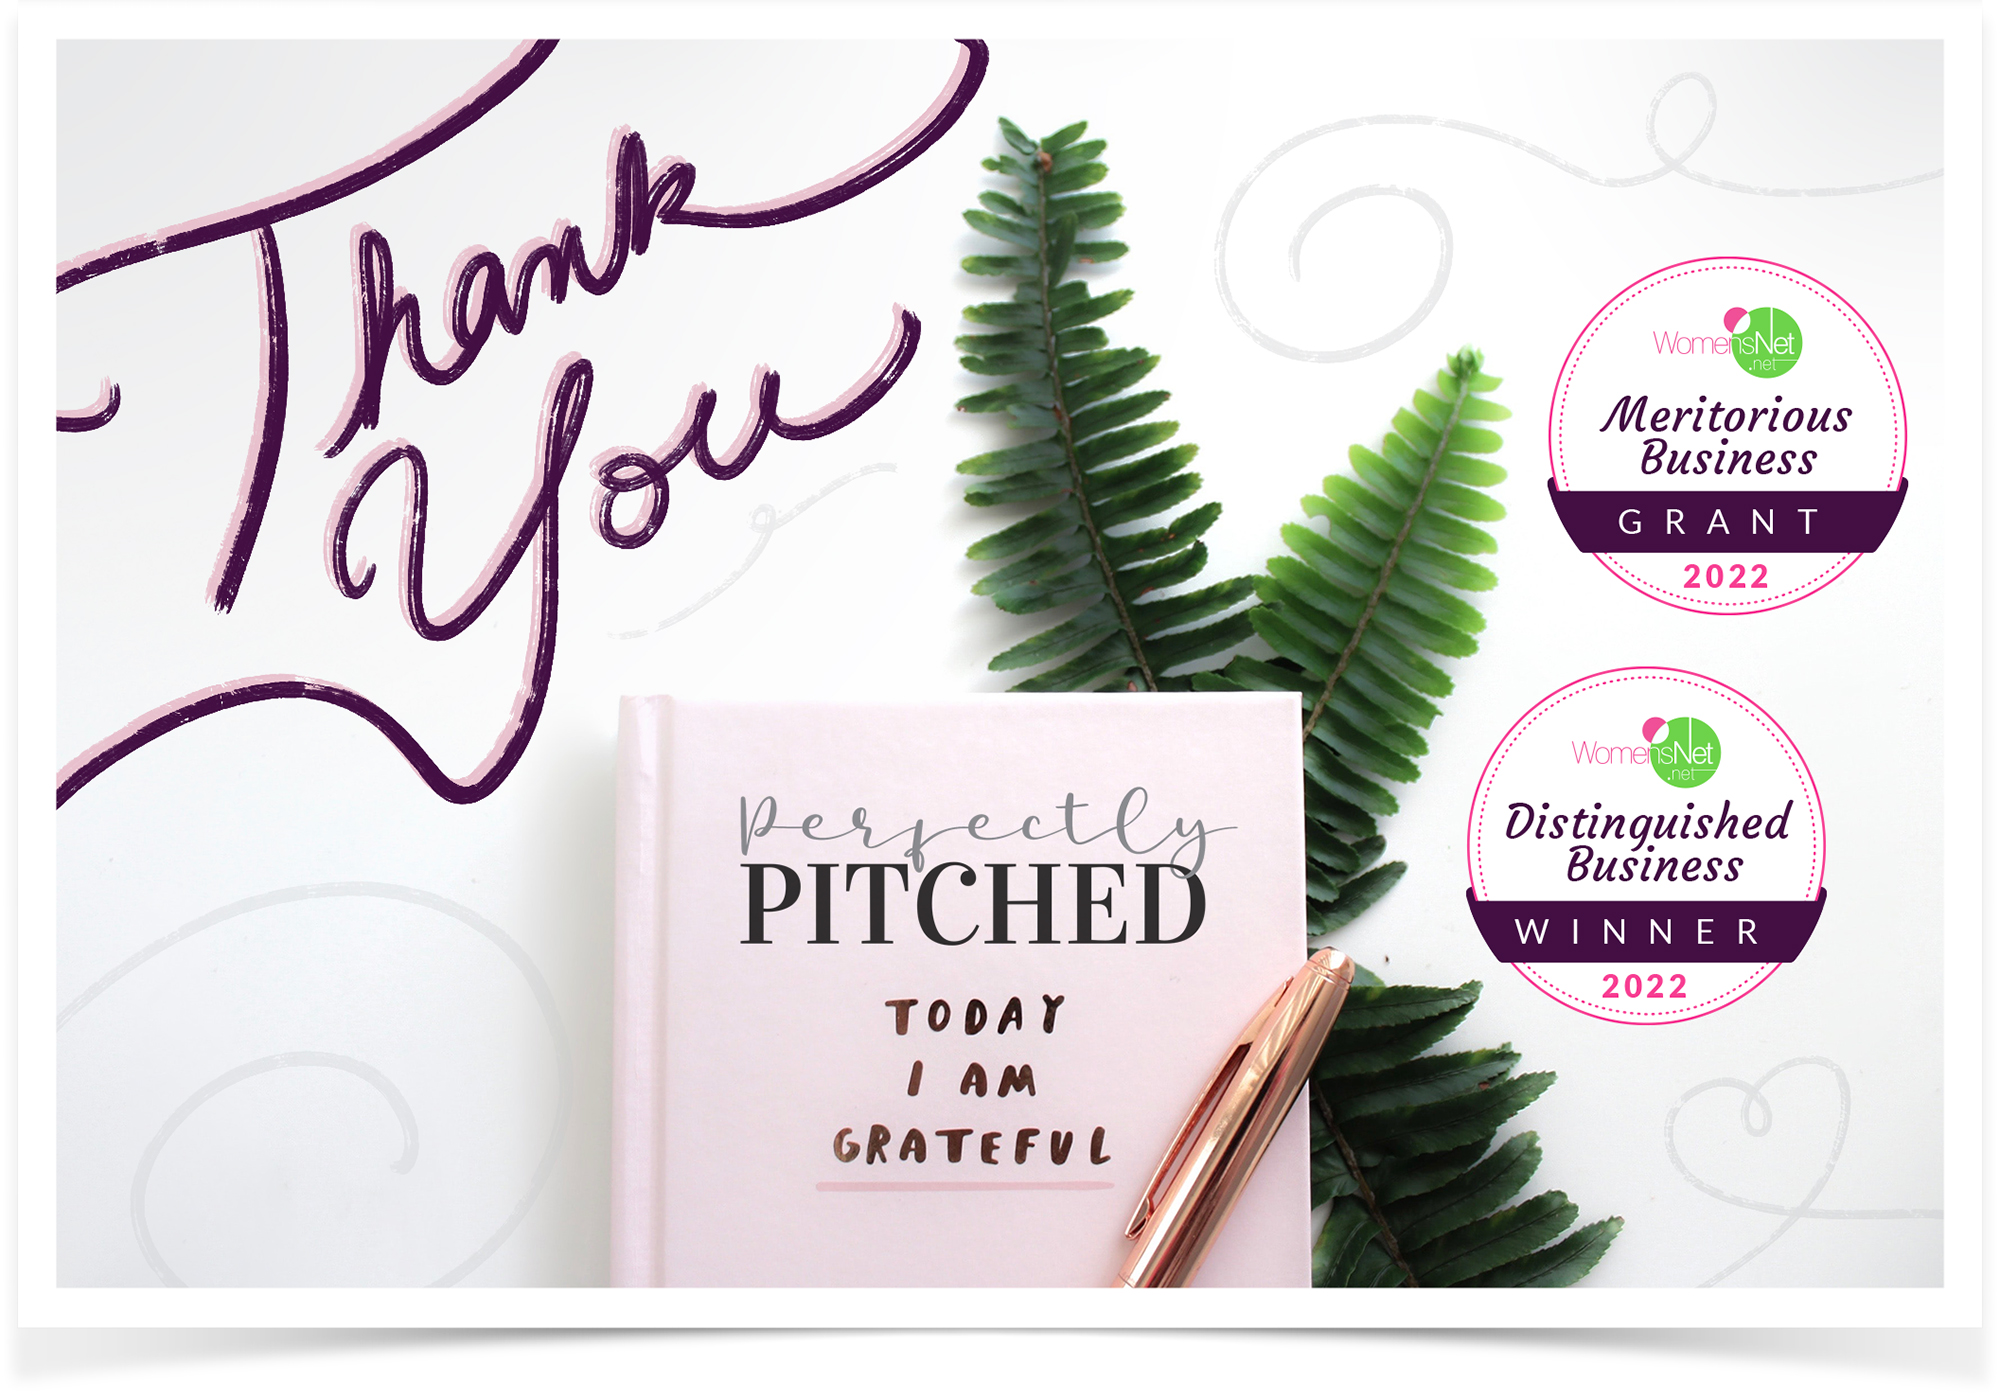 Perfectly Pitched - Today I feel grateful - Thank you to WomensNet Amber Grants for naming Perfectly Pitched as a Meritorious Business Finalist for January 2022